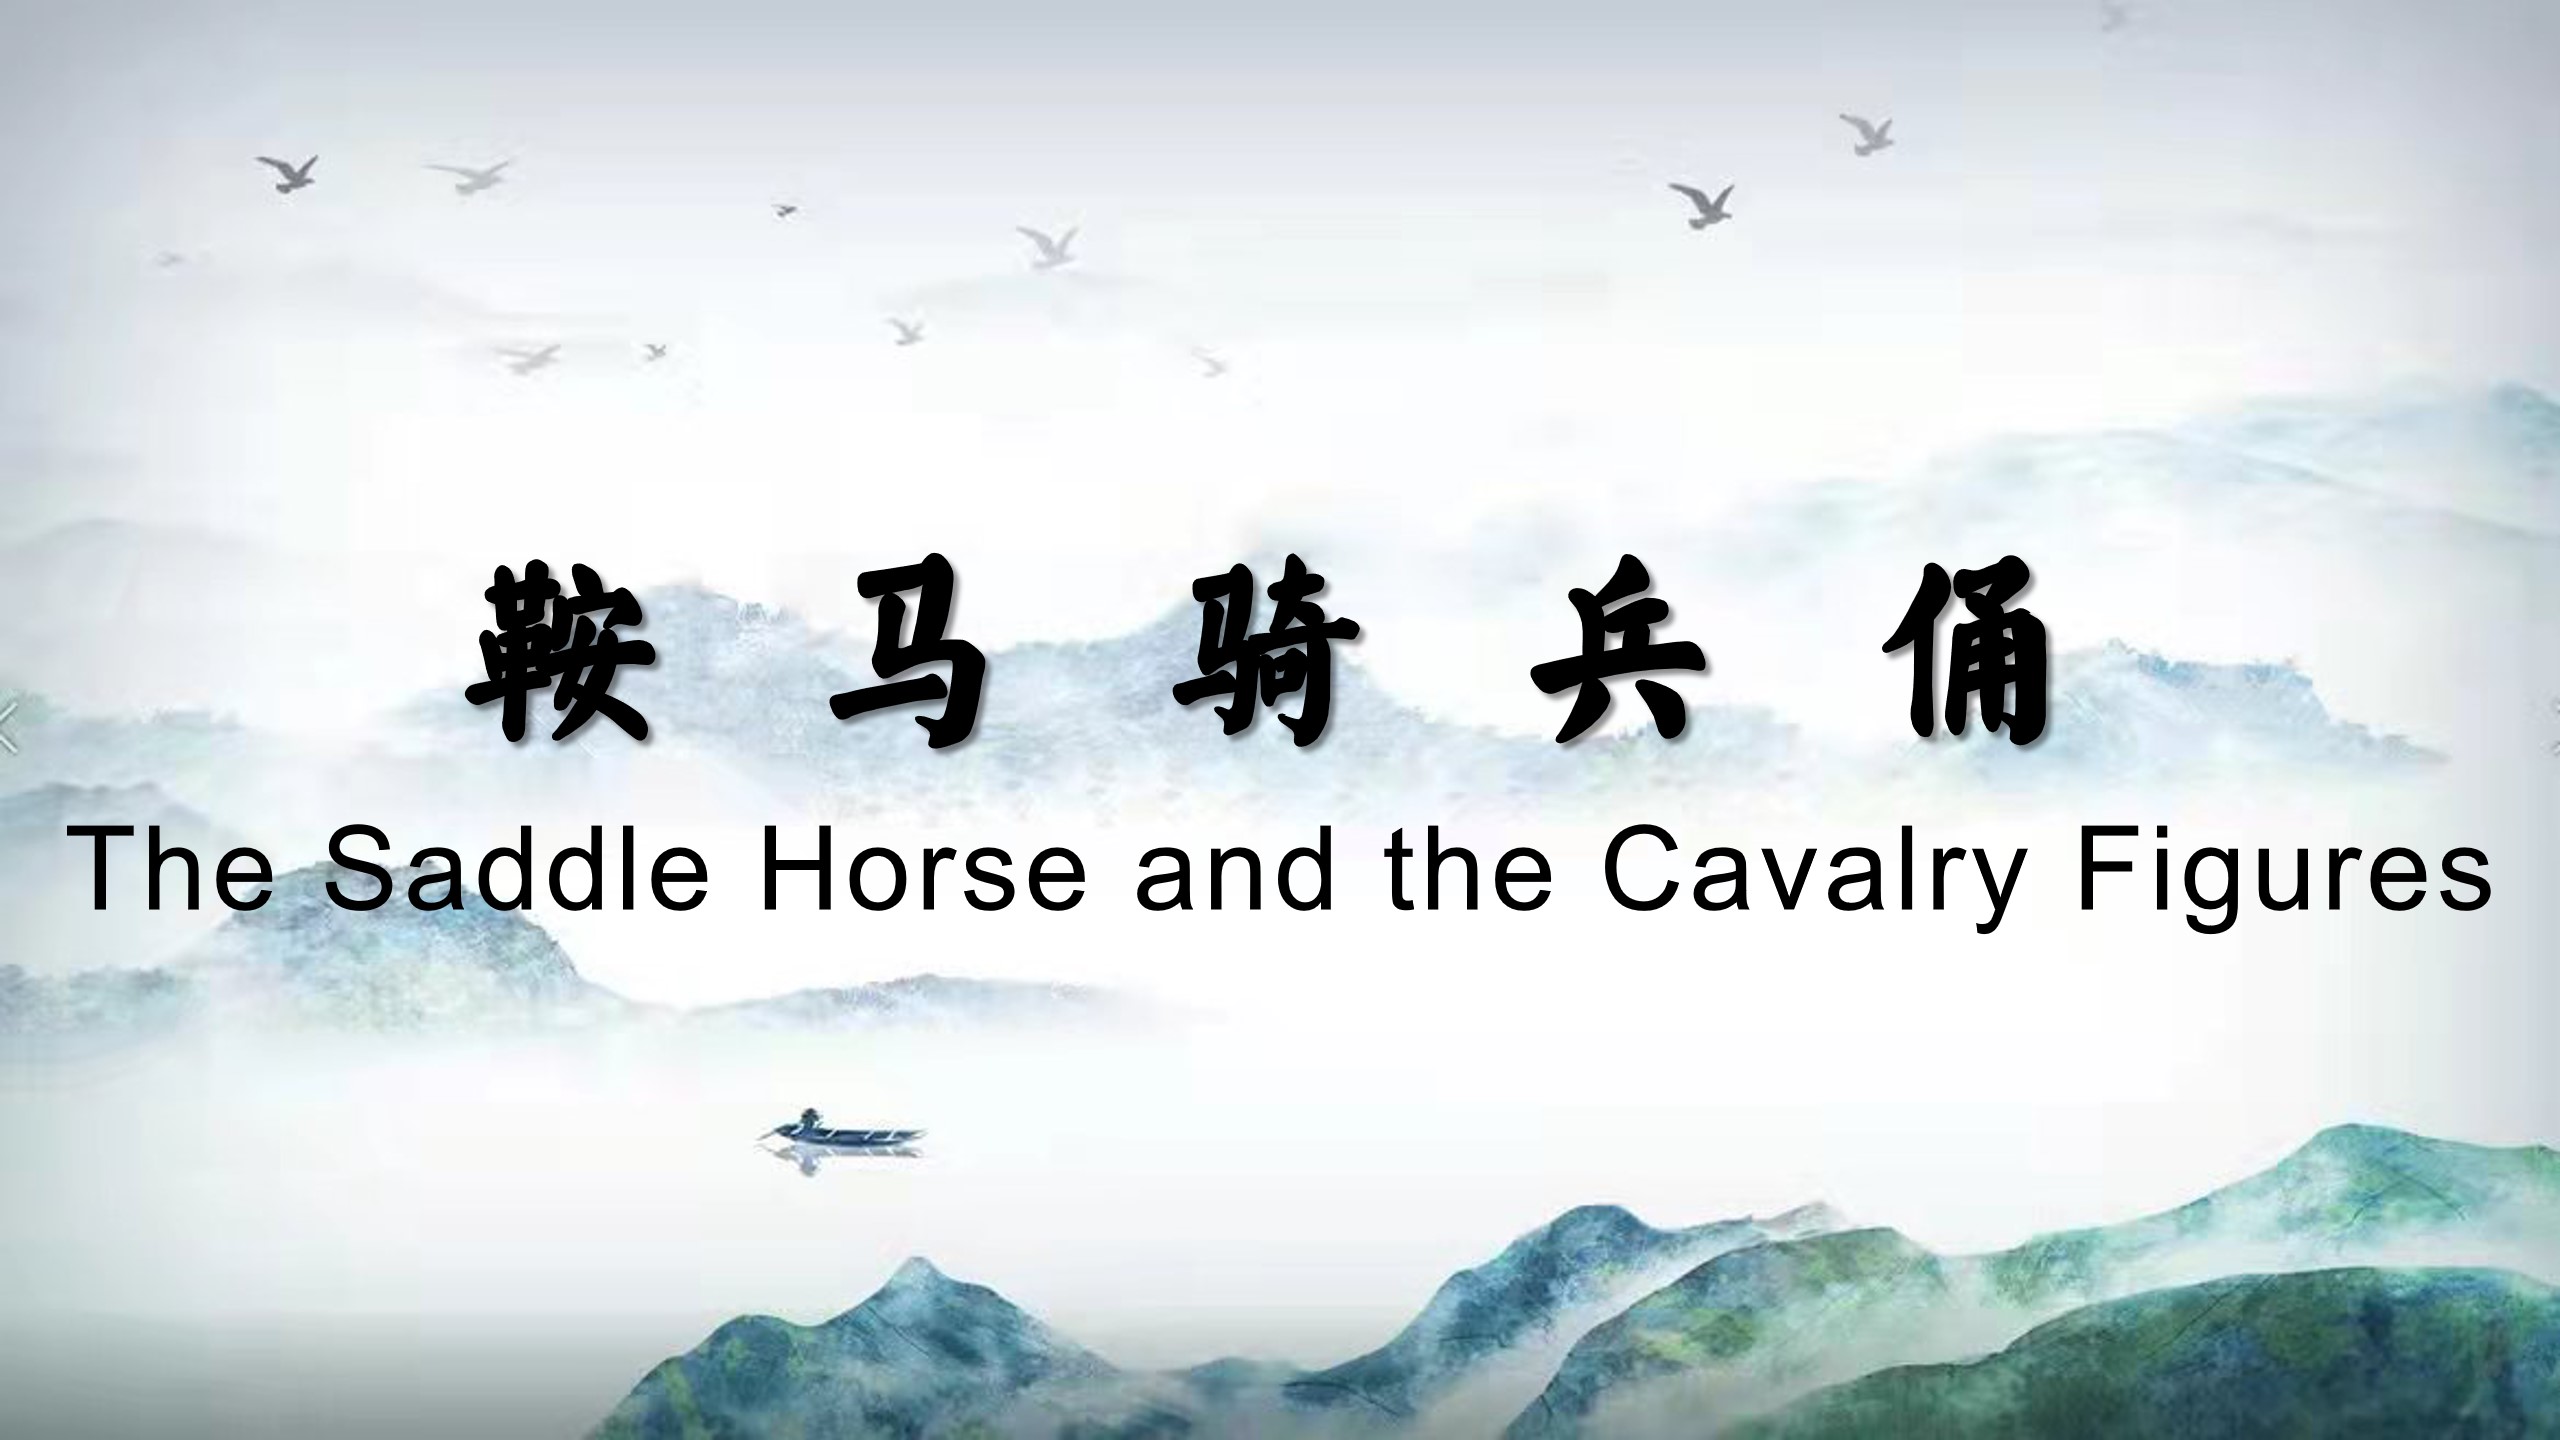 The Saddle Horse and the Cavalry Figures